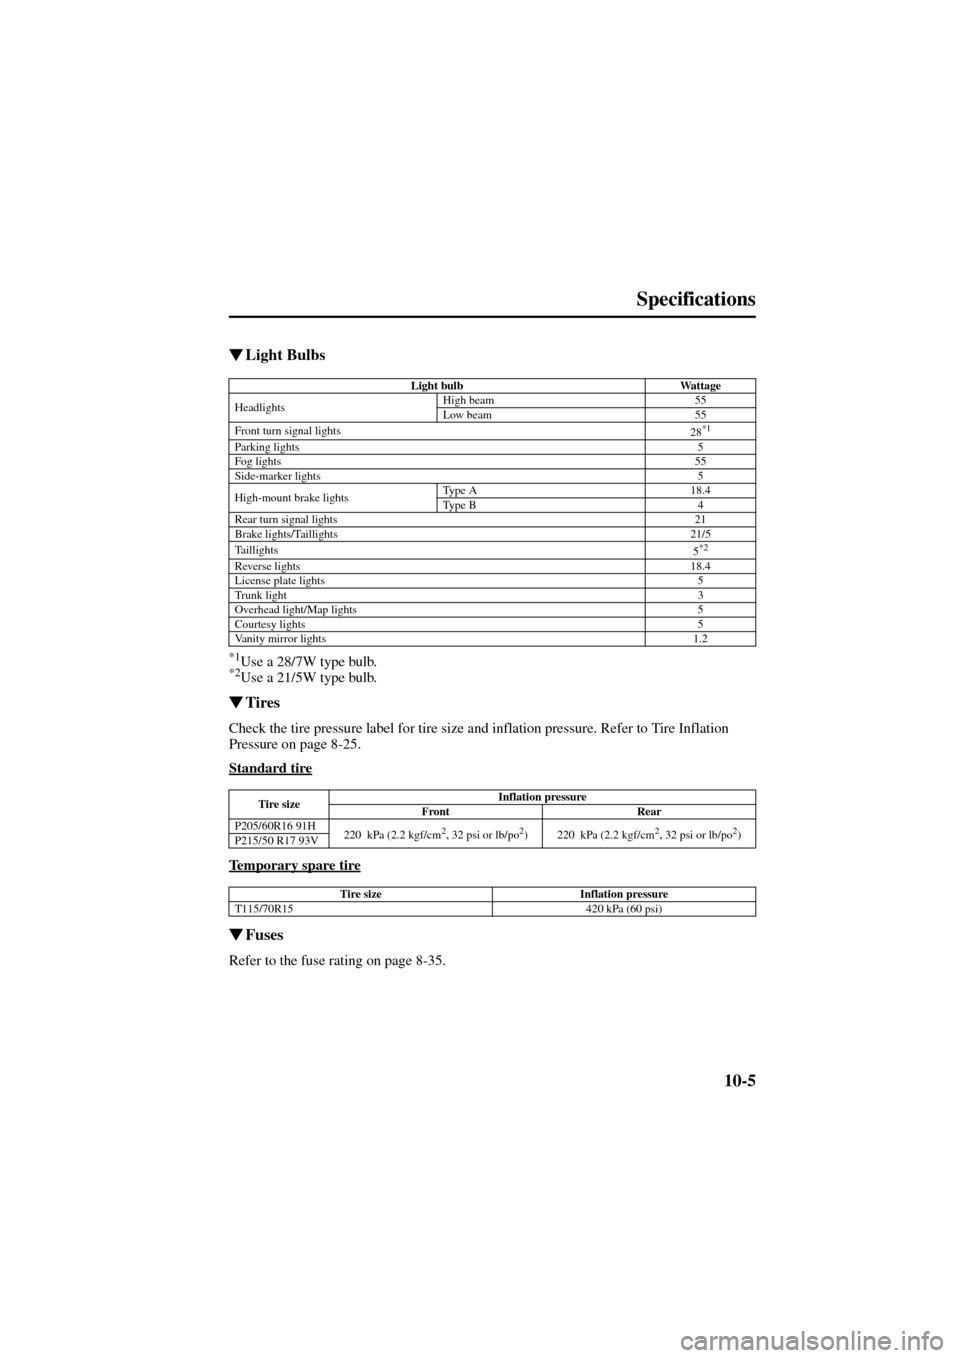 MAZDA MODEL 6 2004  Owners Manual (in English) 10-5
Specifications
Form No. 8R29-EA-02I
Light Bulbs
*1Use a 28/7W type bulb.*2Use a 21/5W type bulb.
Tires
Check the tire pressure label for tire size and inflation pressure. Refer to Tire Inflatio